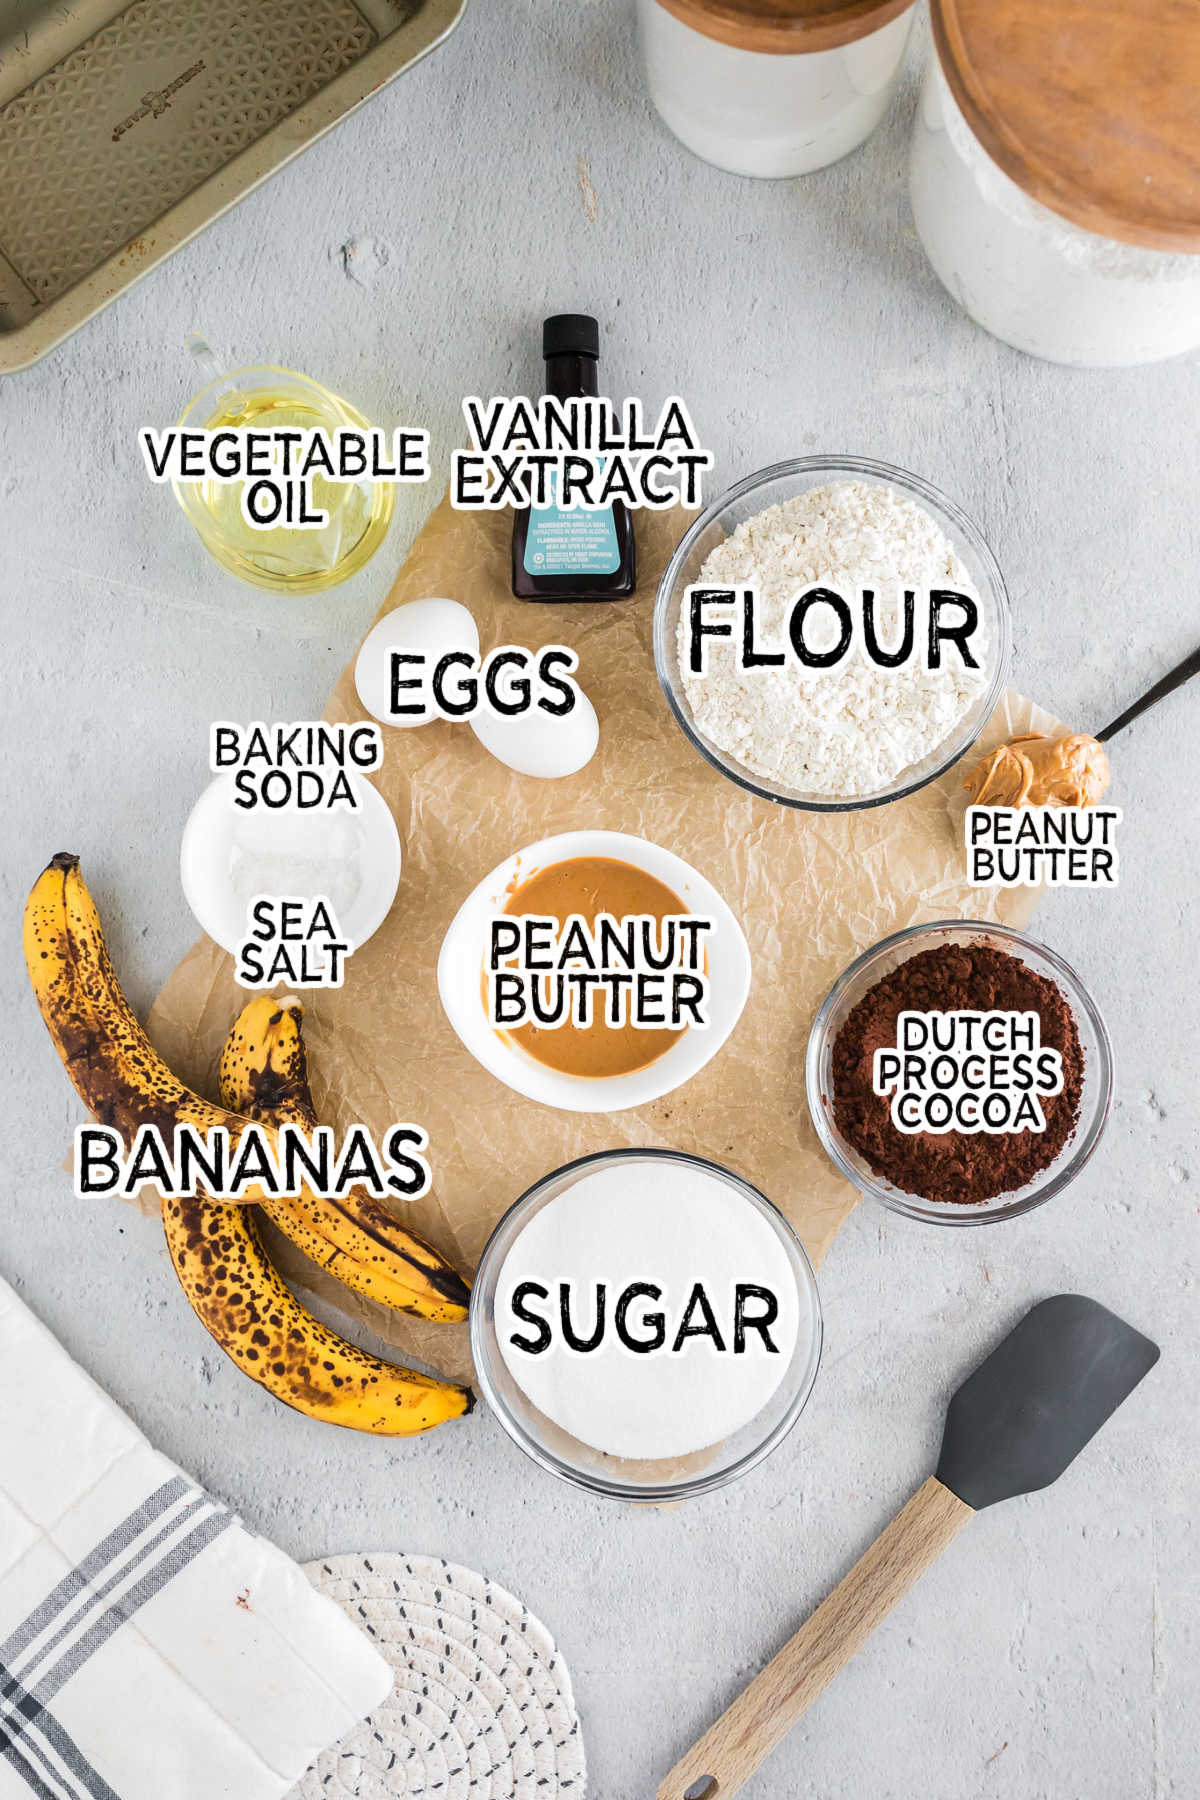 Ingredients to make chocolate peanut butter banana bread.